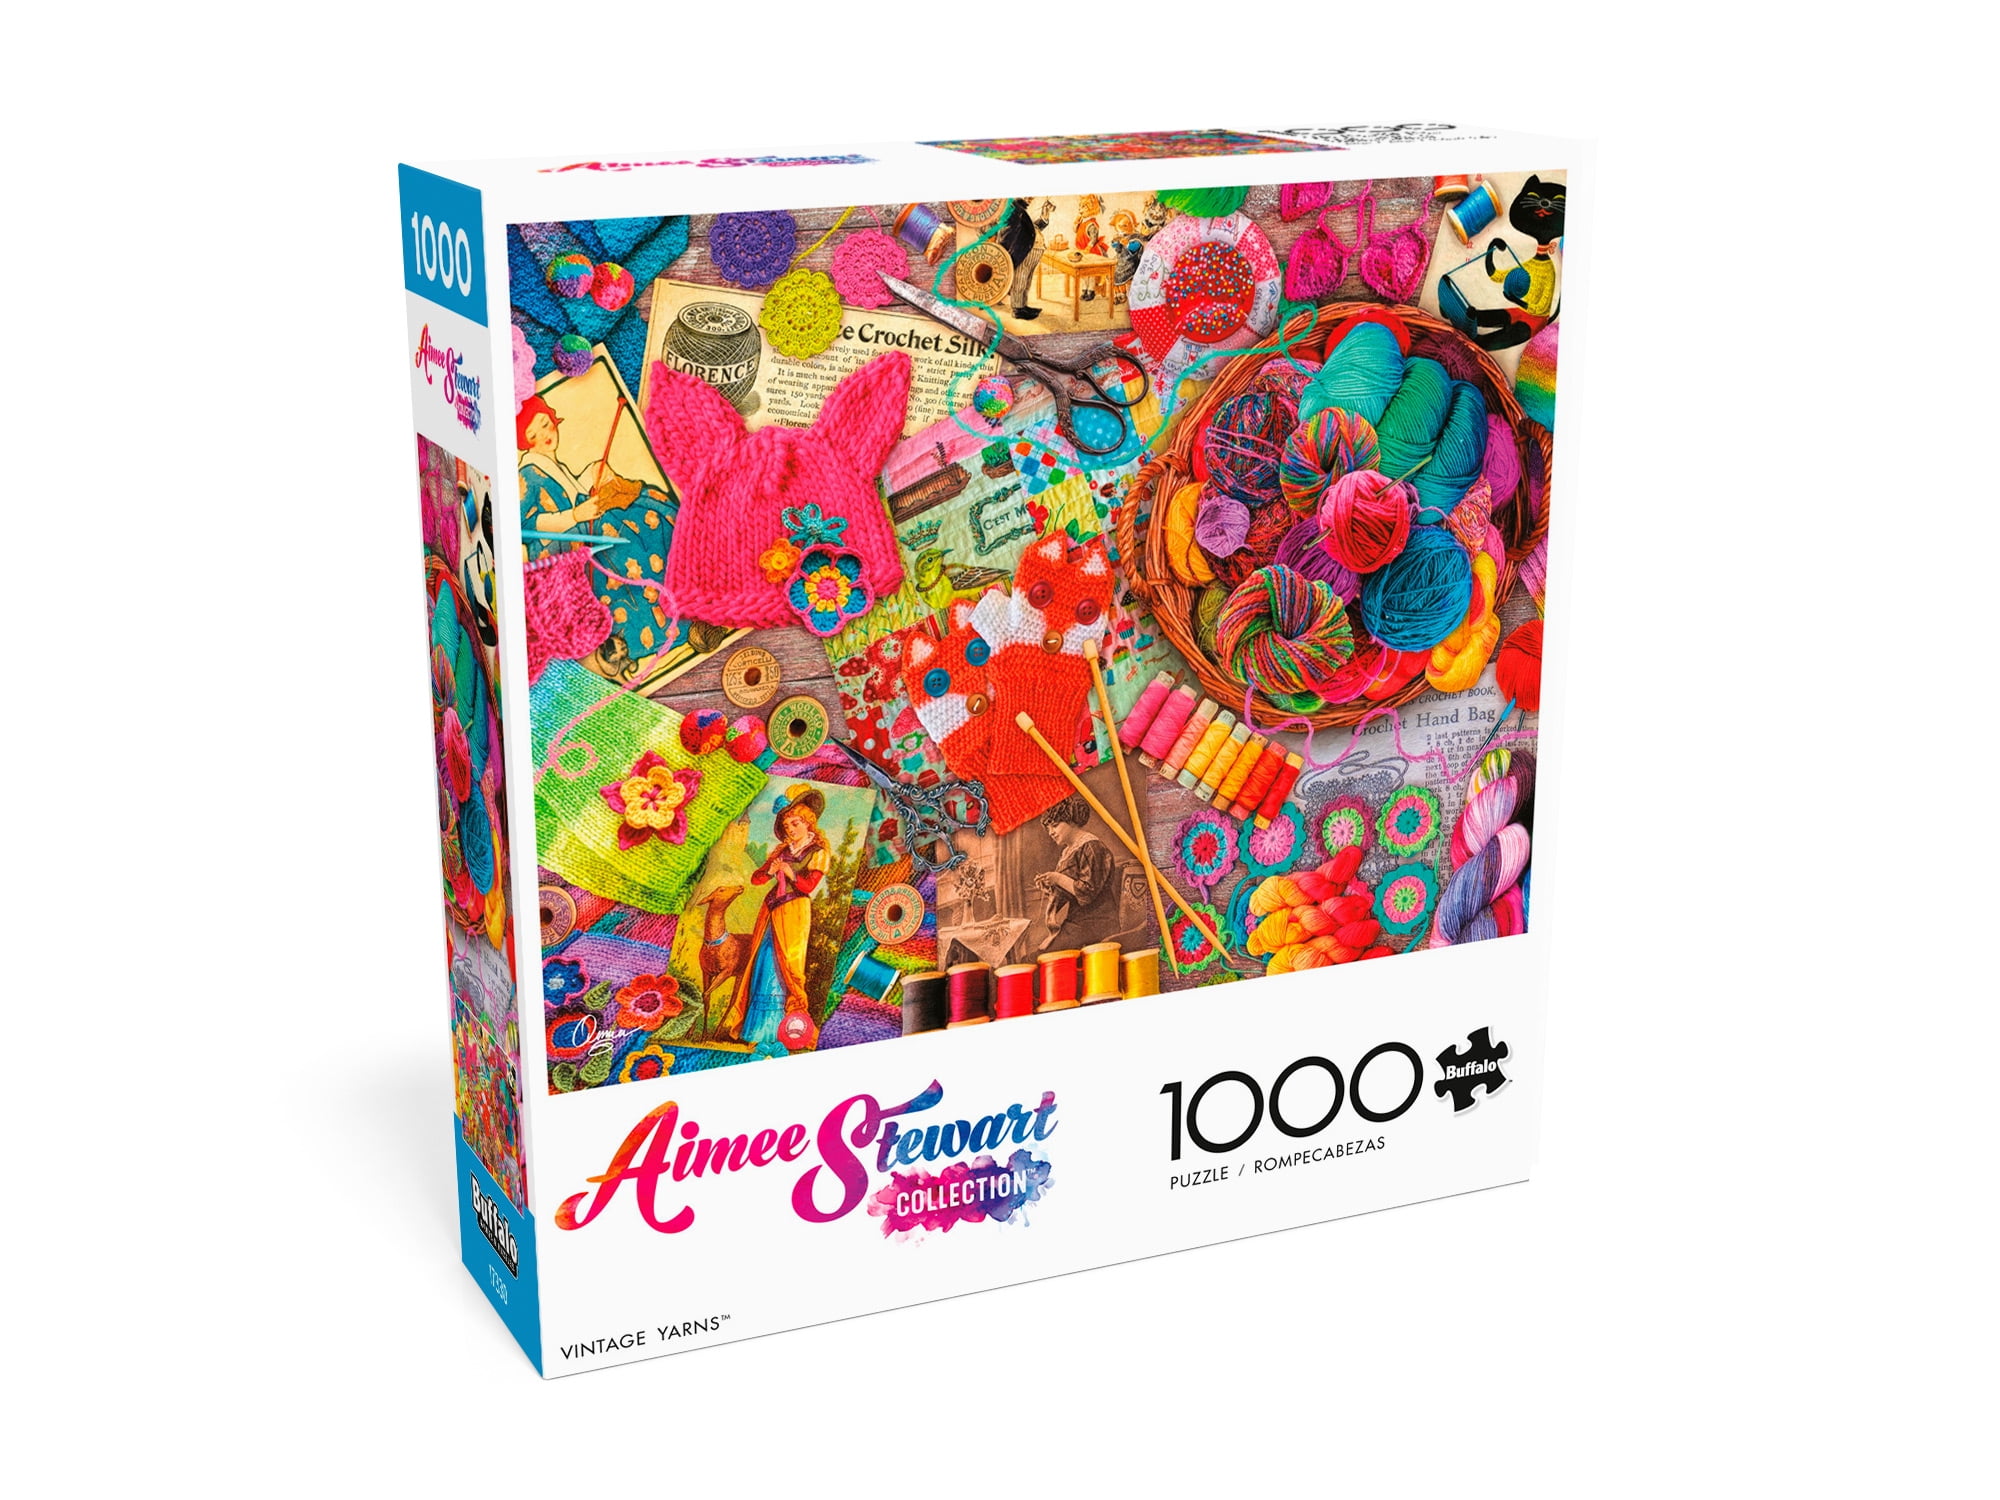 Solve Speckled yarn jigsaw puzzle online with 48 pieces